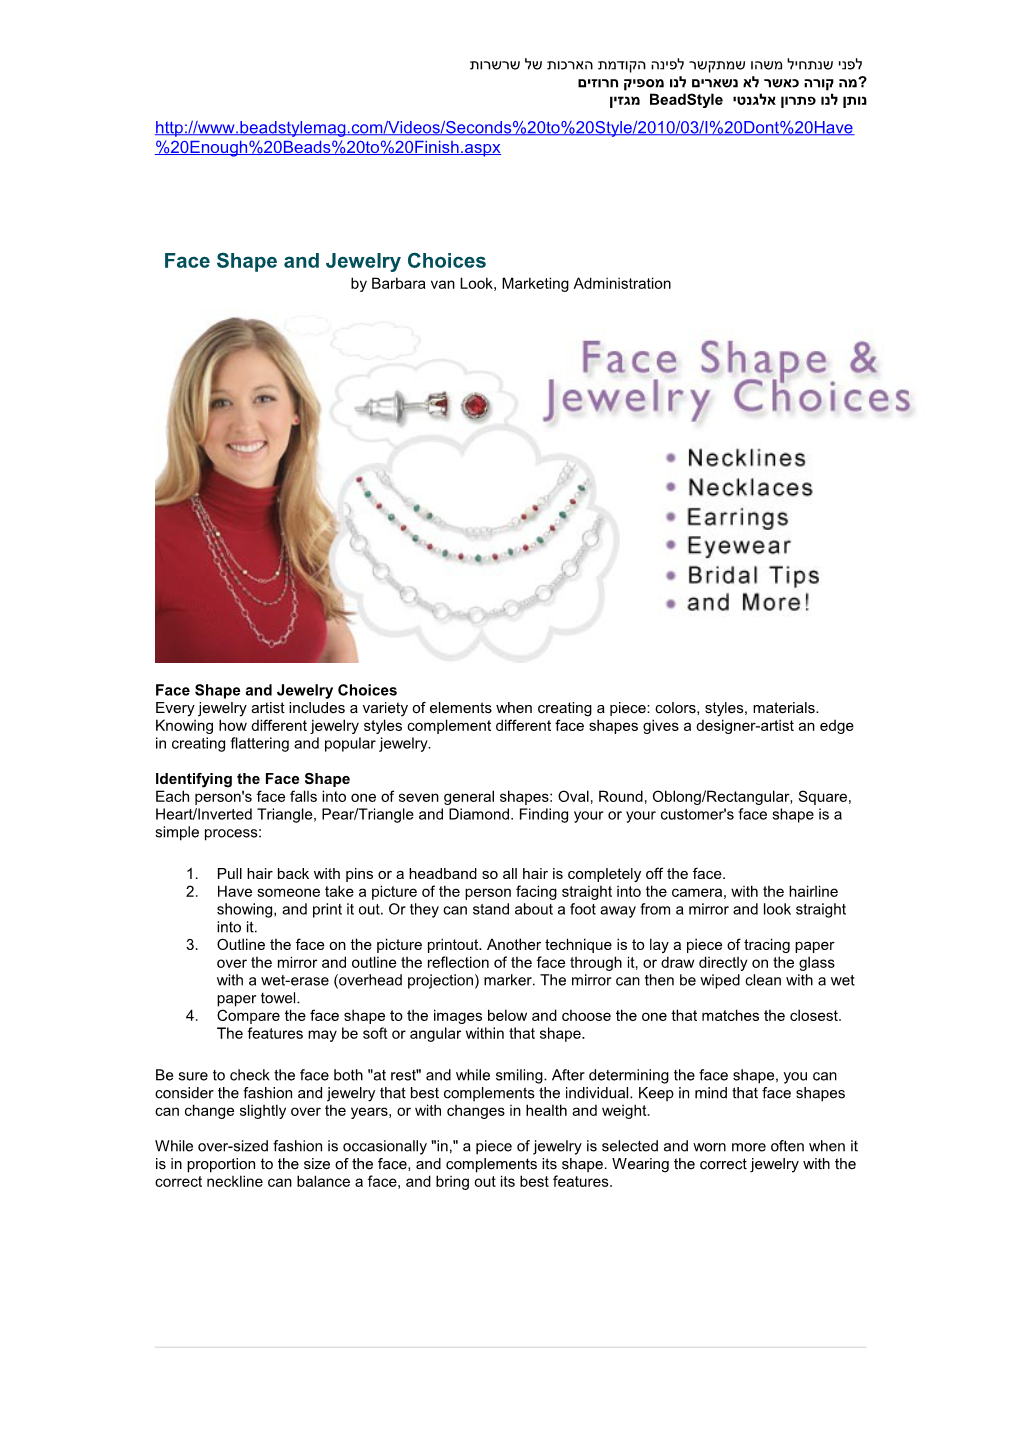 Face Shape and Jewelry Choices